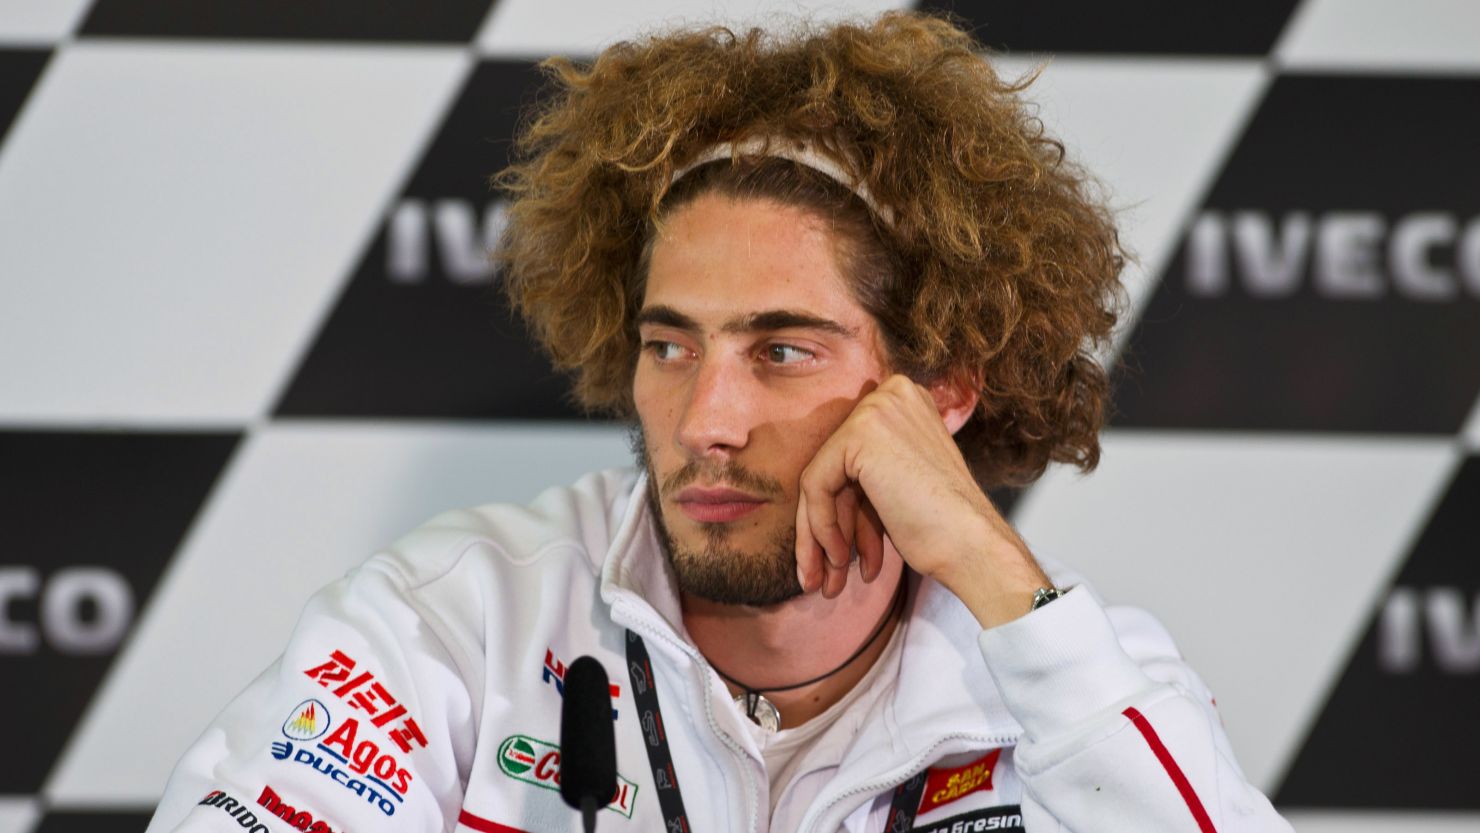 Italian Marco Simoncelli was 24 when he was killed in a crash at the Sepang circuit in Malaysia. 